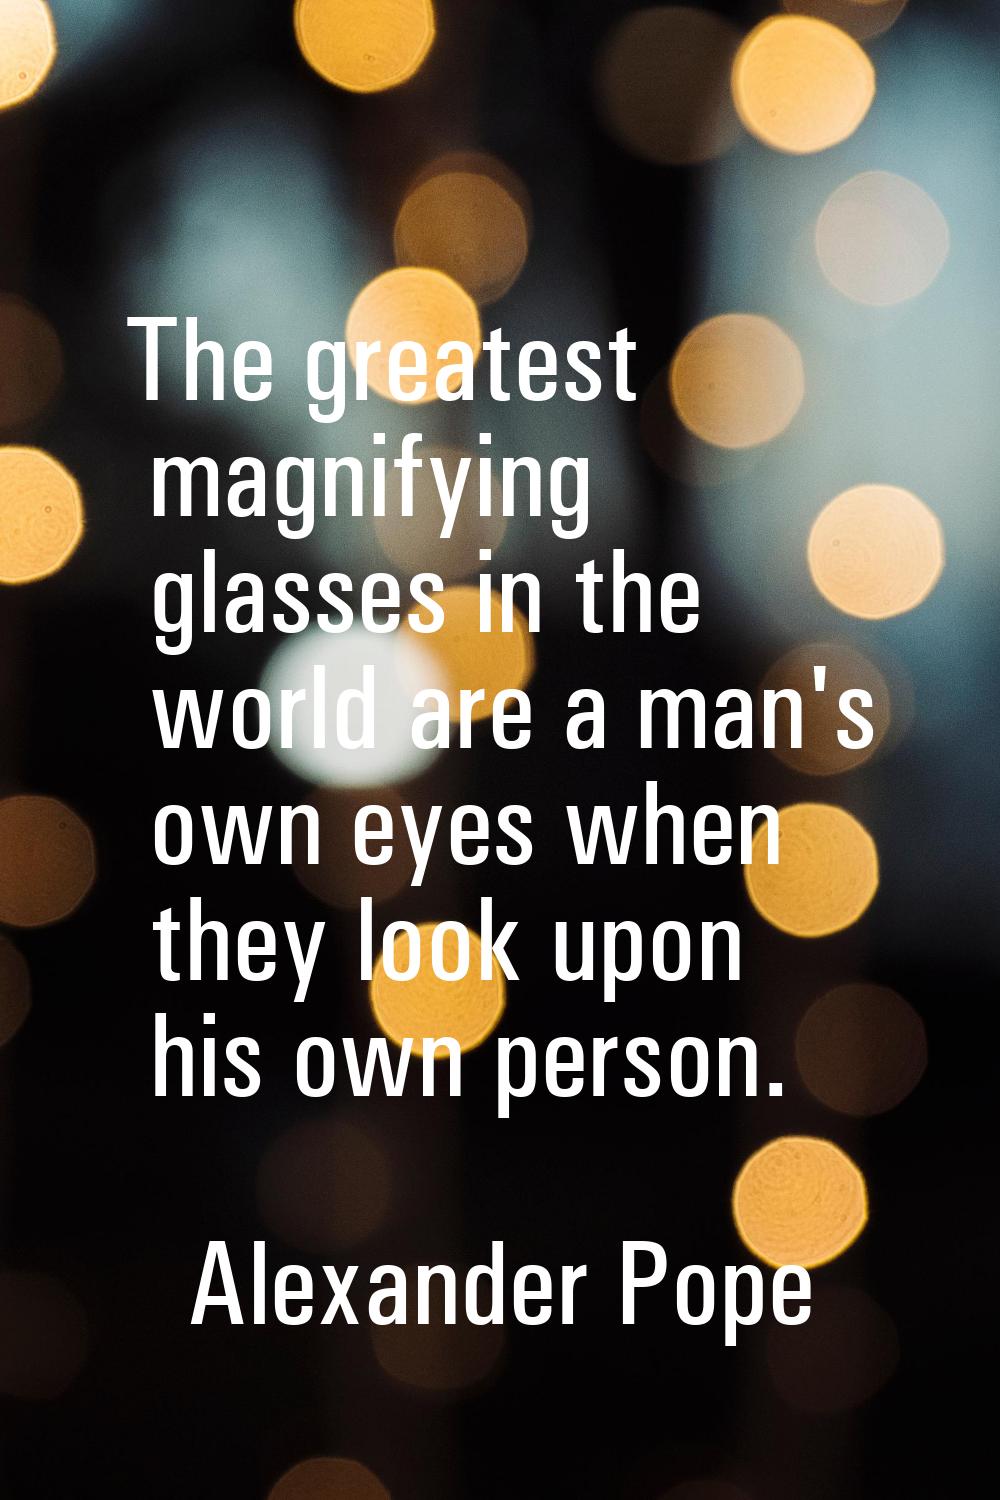 The greatest magnifying glasses in the world are a man's own eyes when they look upon his own perso